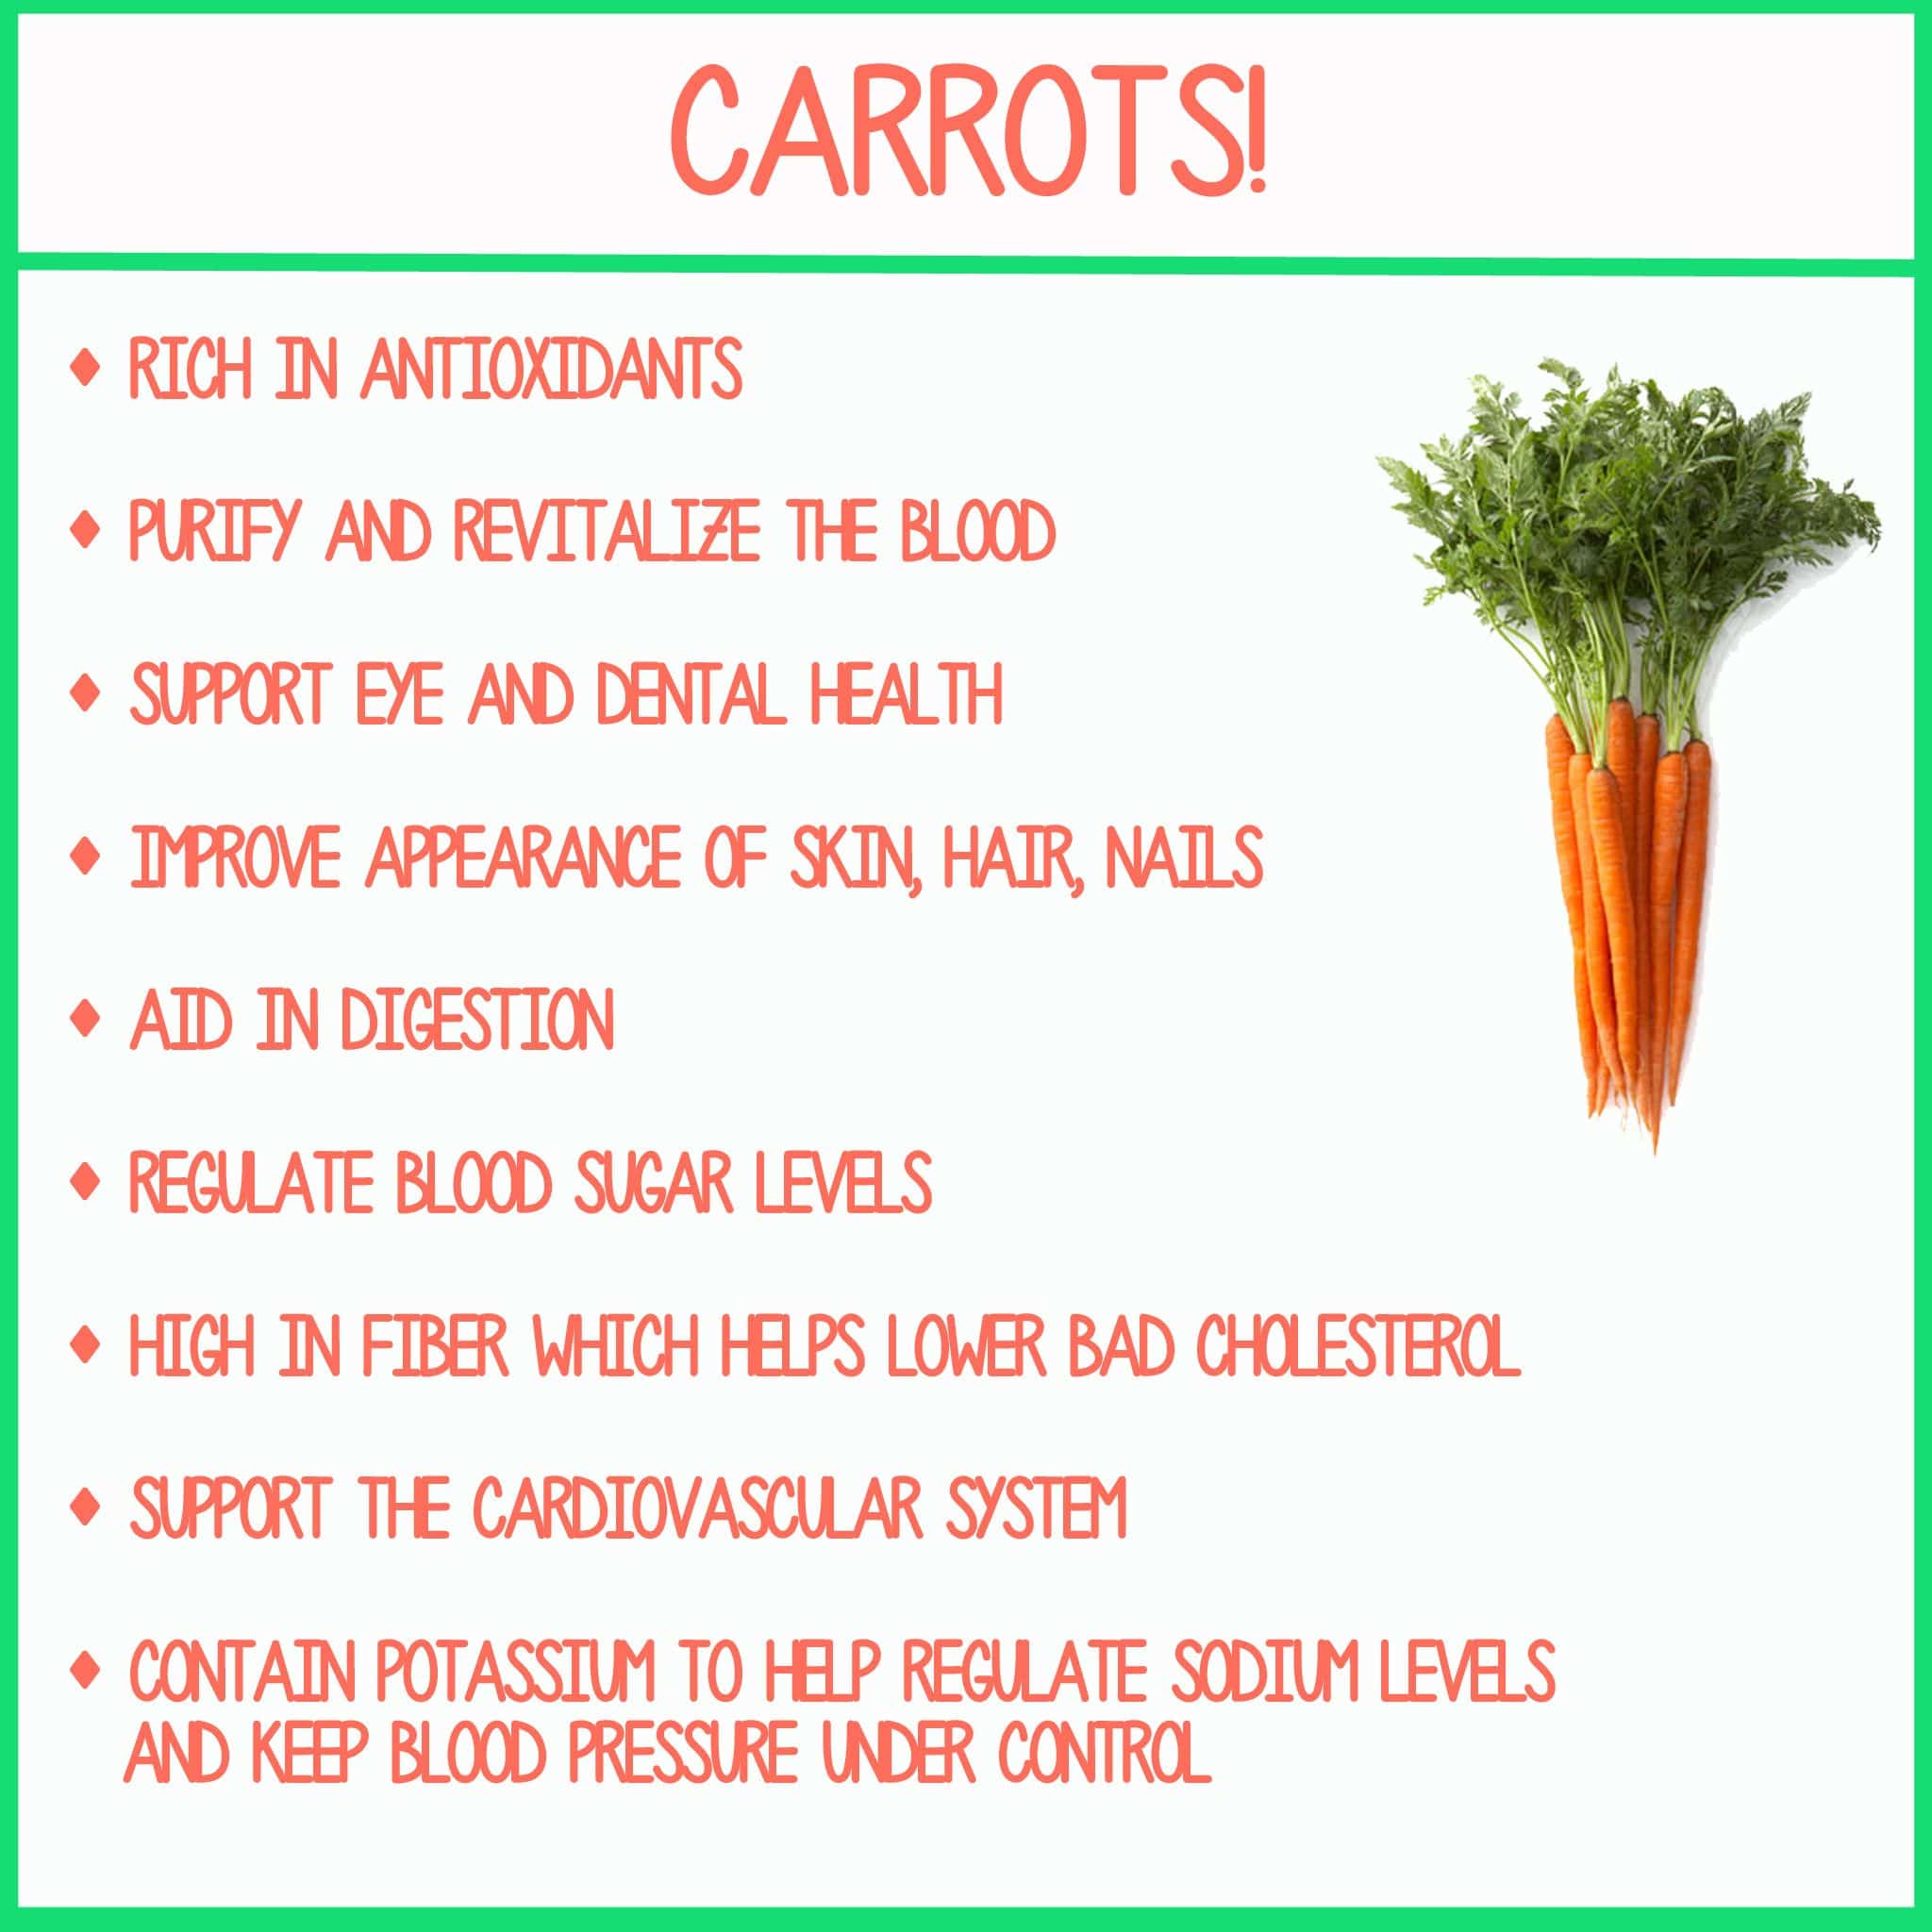 You can find fresh, local carrots available nearly year